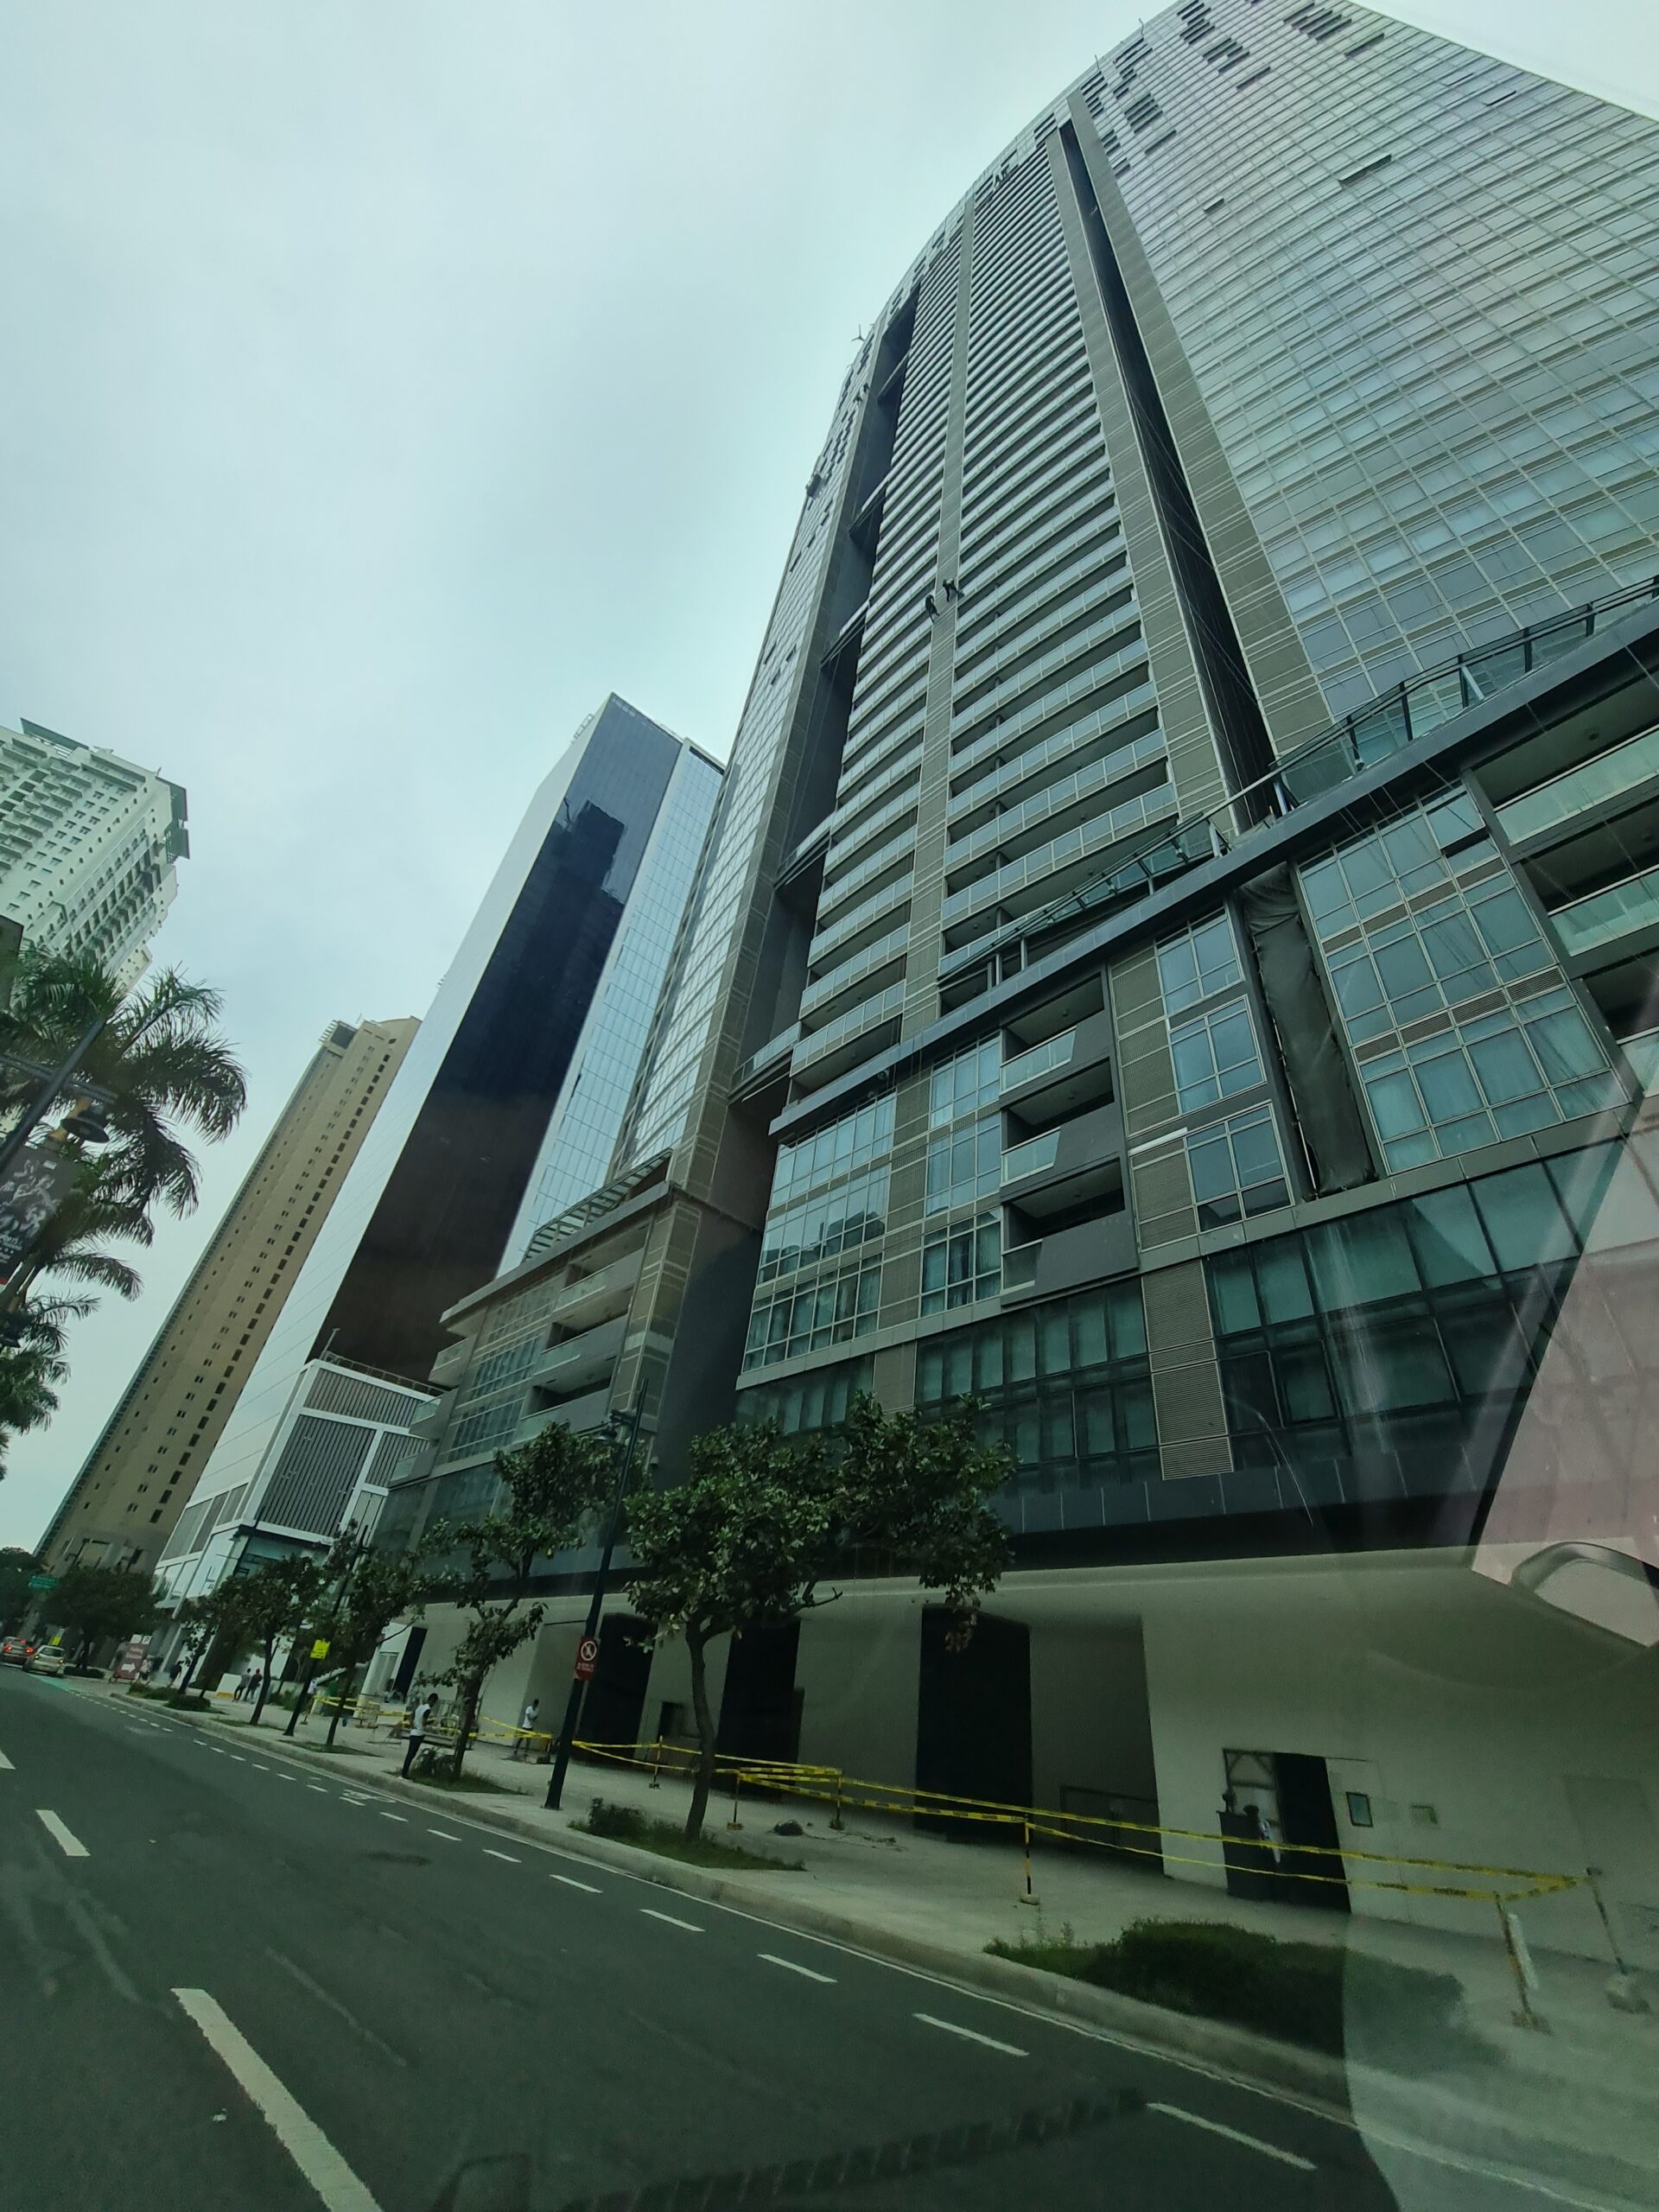 2 Bedroom For Sale in East Gallery Place, BGC